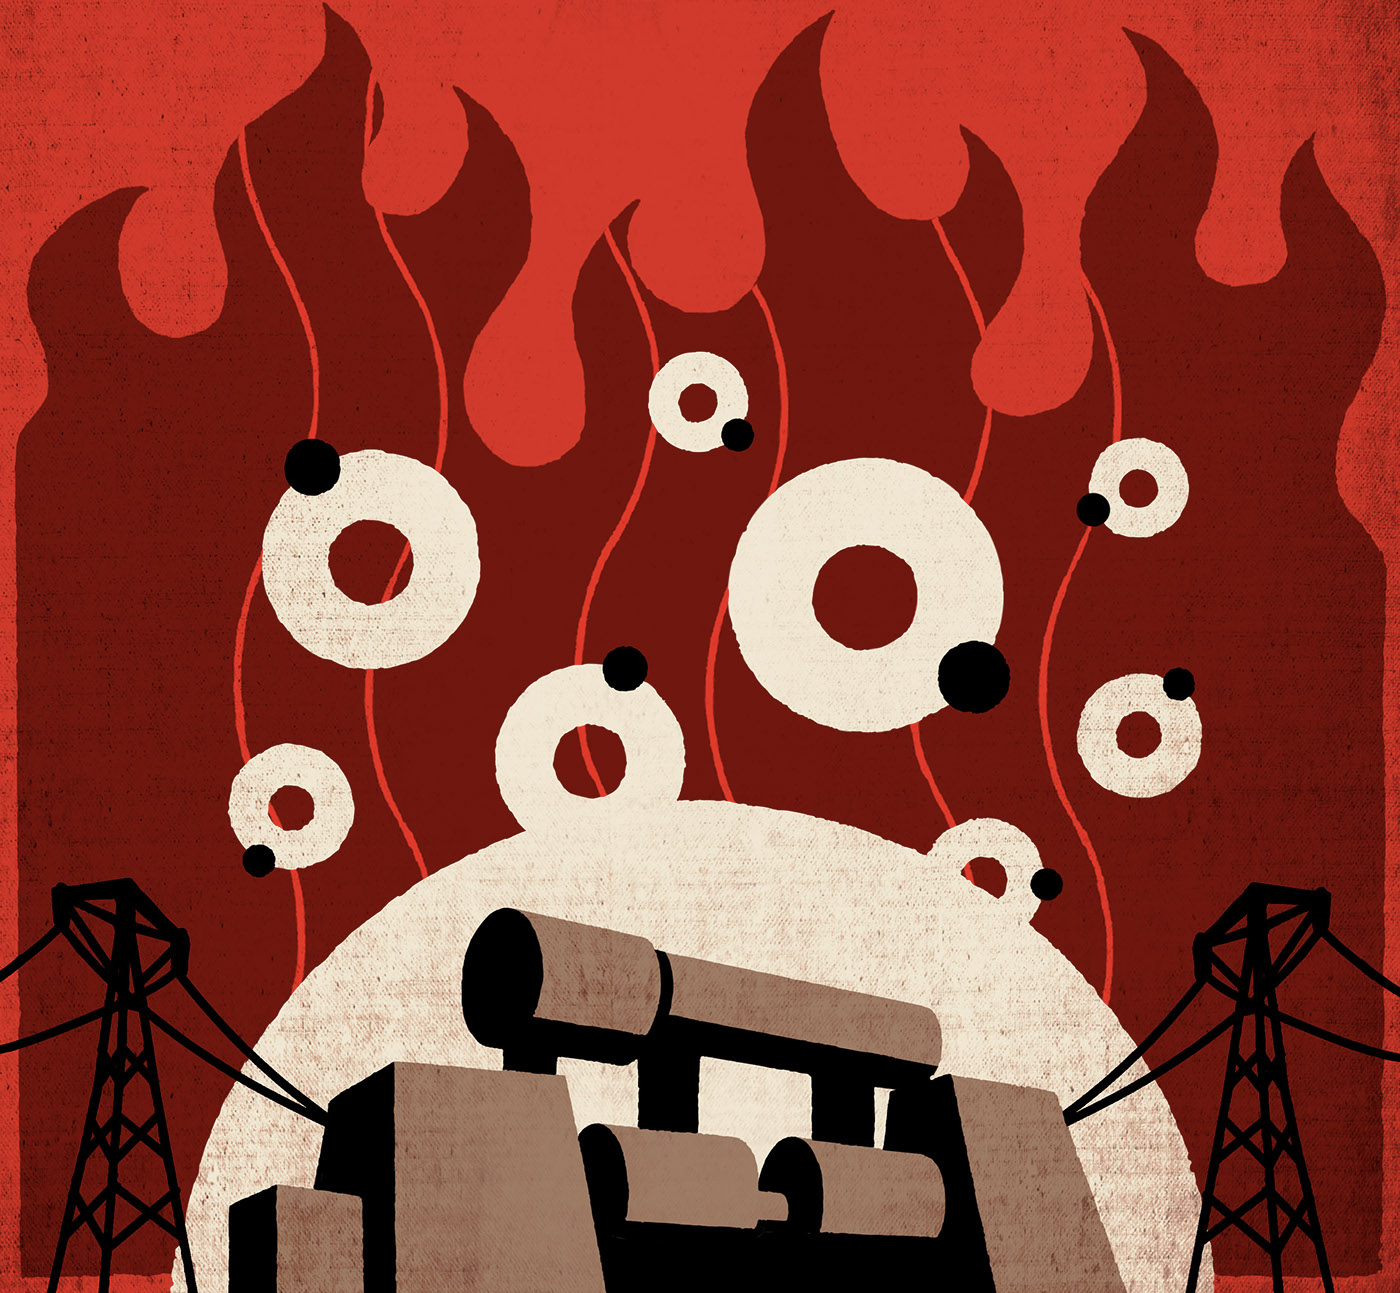 fire machinery electricity ILLUSTRATION  editorial insurance gritty illo. power